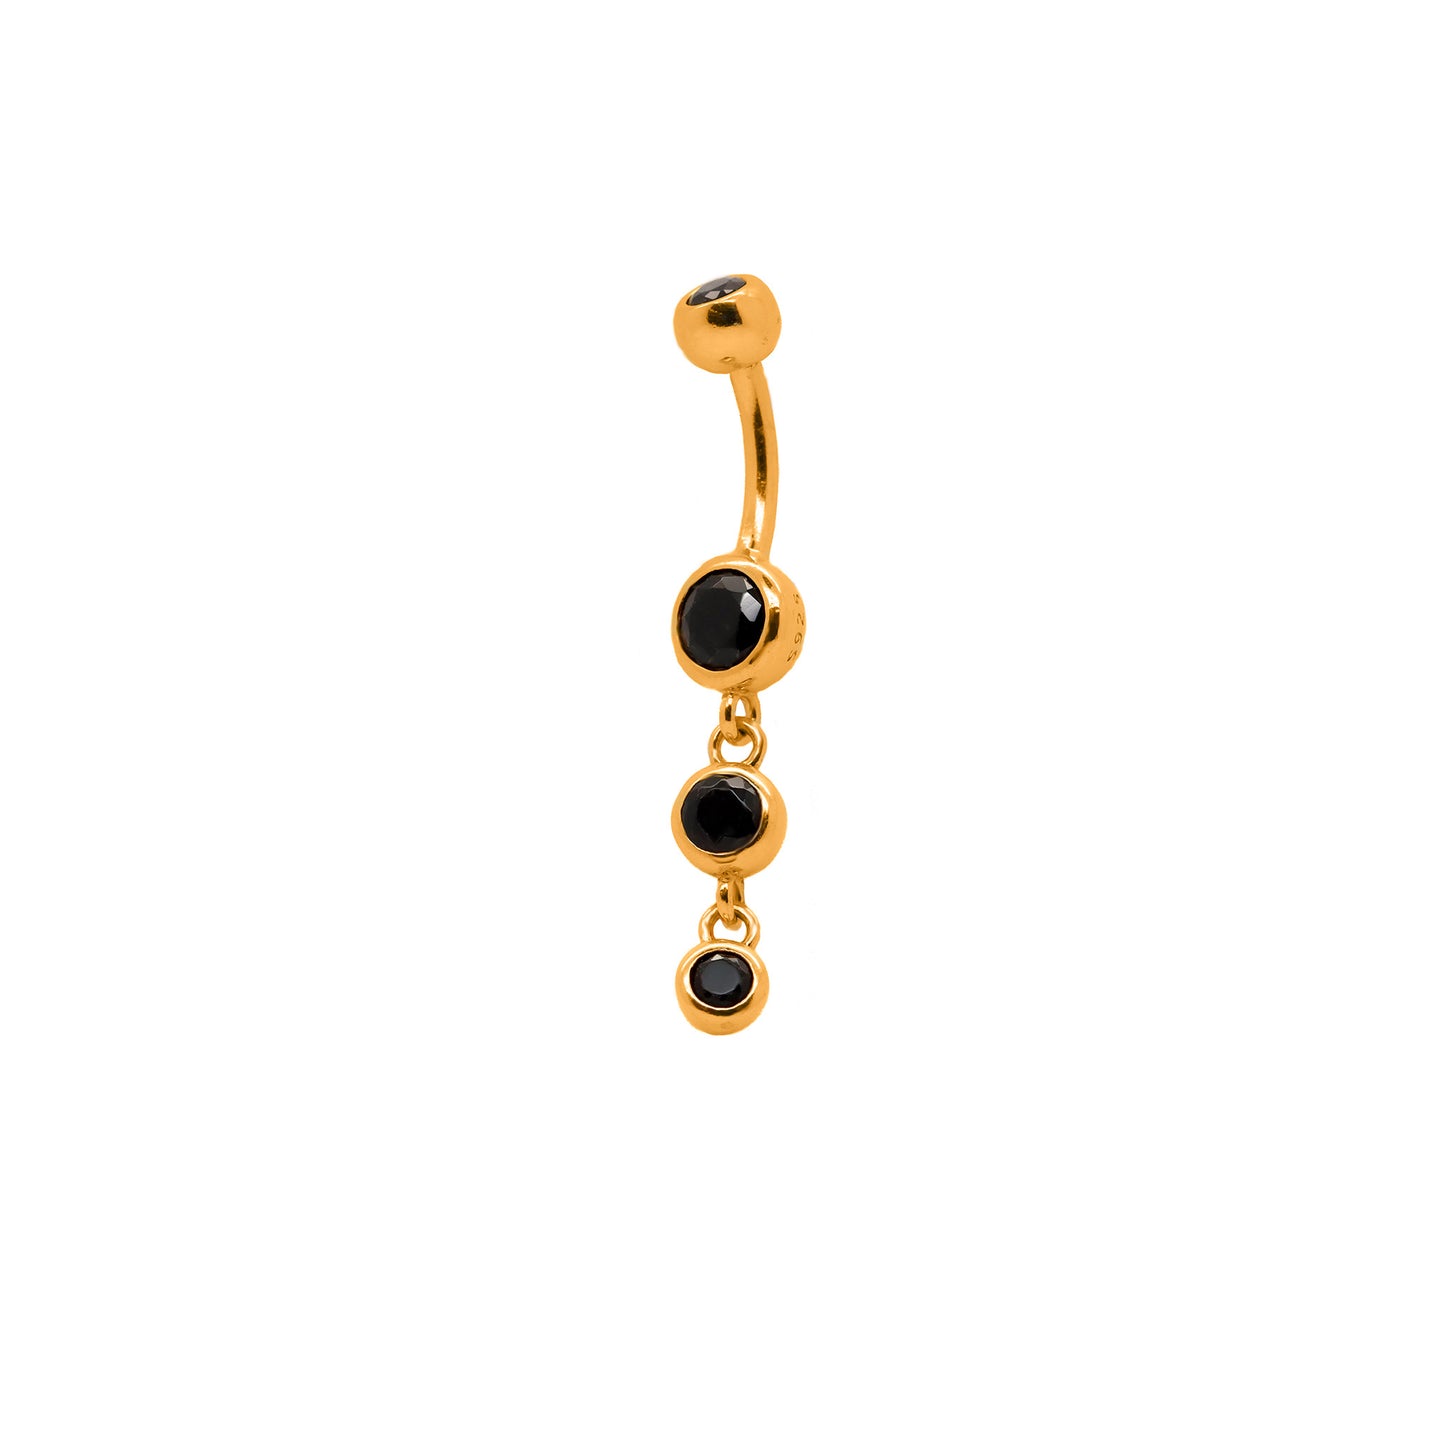 Vermeil | 925 Silver 24k Gold Coated Black CZ Triple Charm Dangle Belly Ring | 14G 6mm 1/4" 8mm 5/16" 10mm 3/8" - Sturdy South